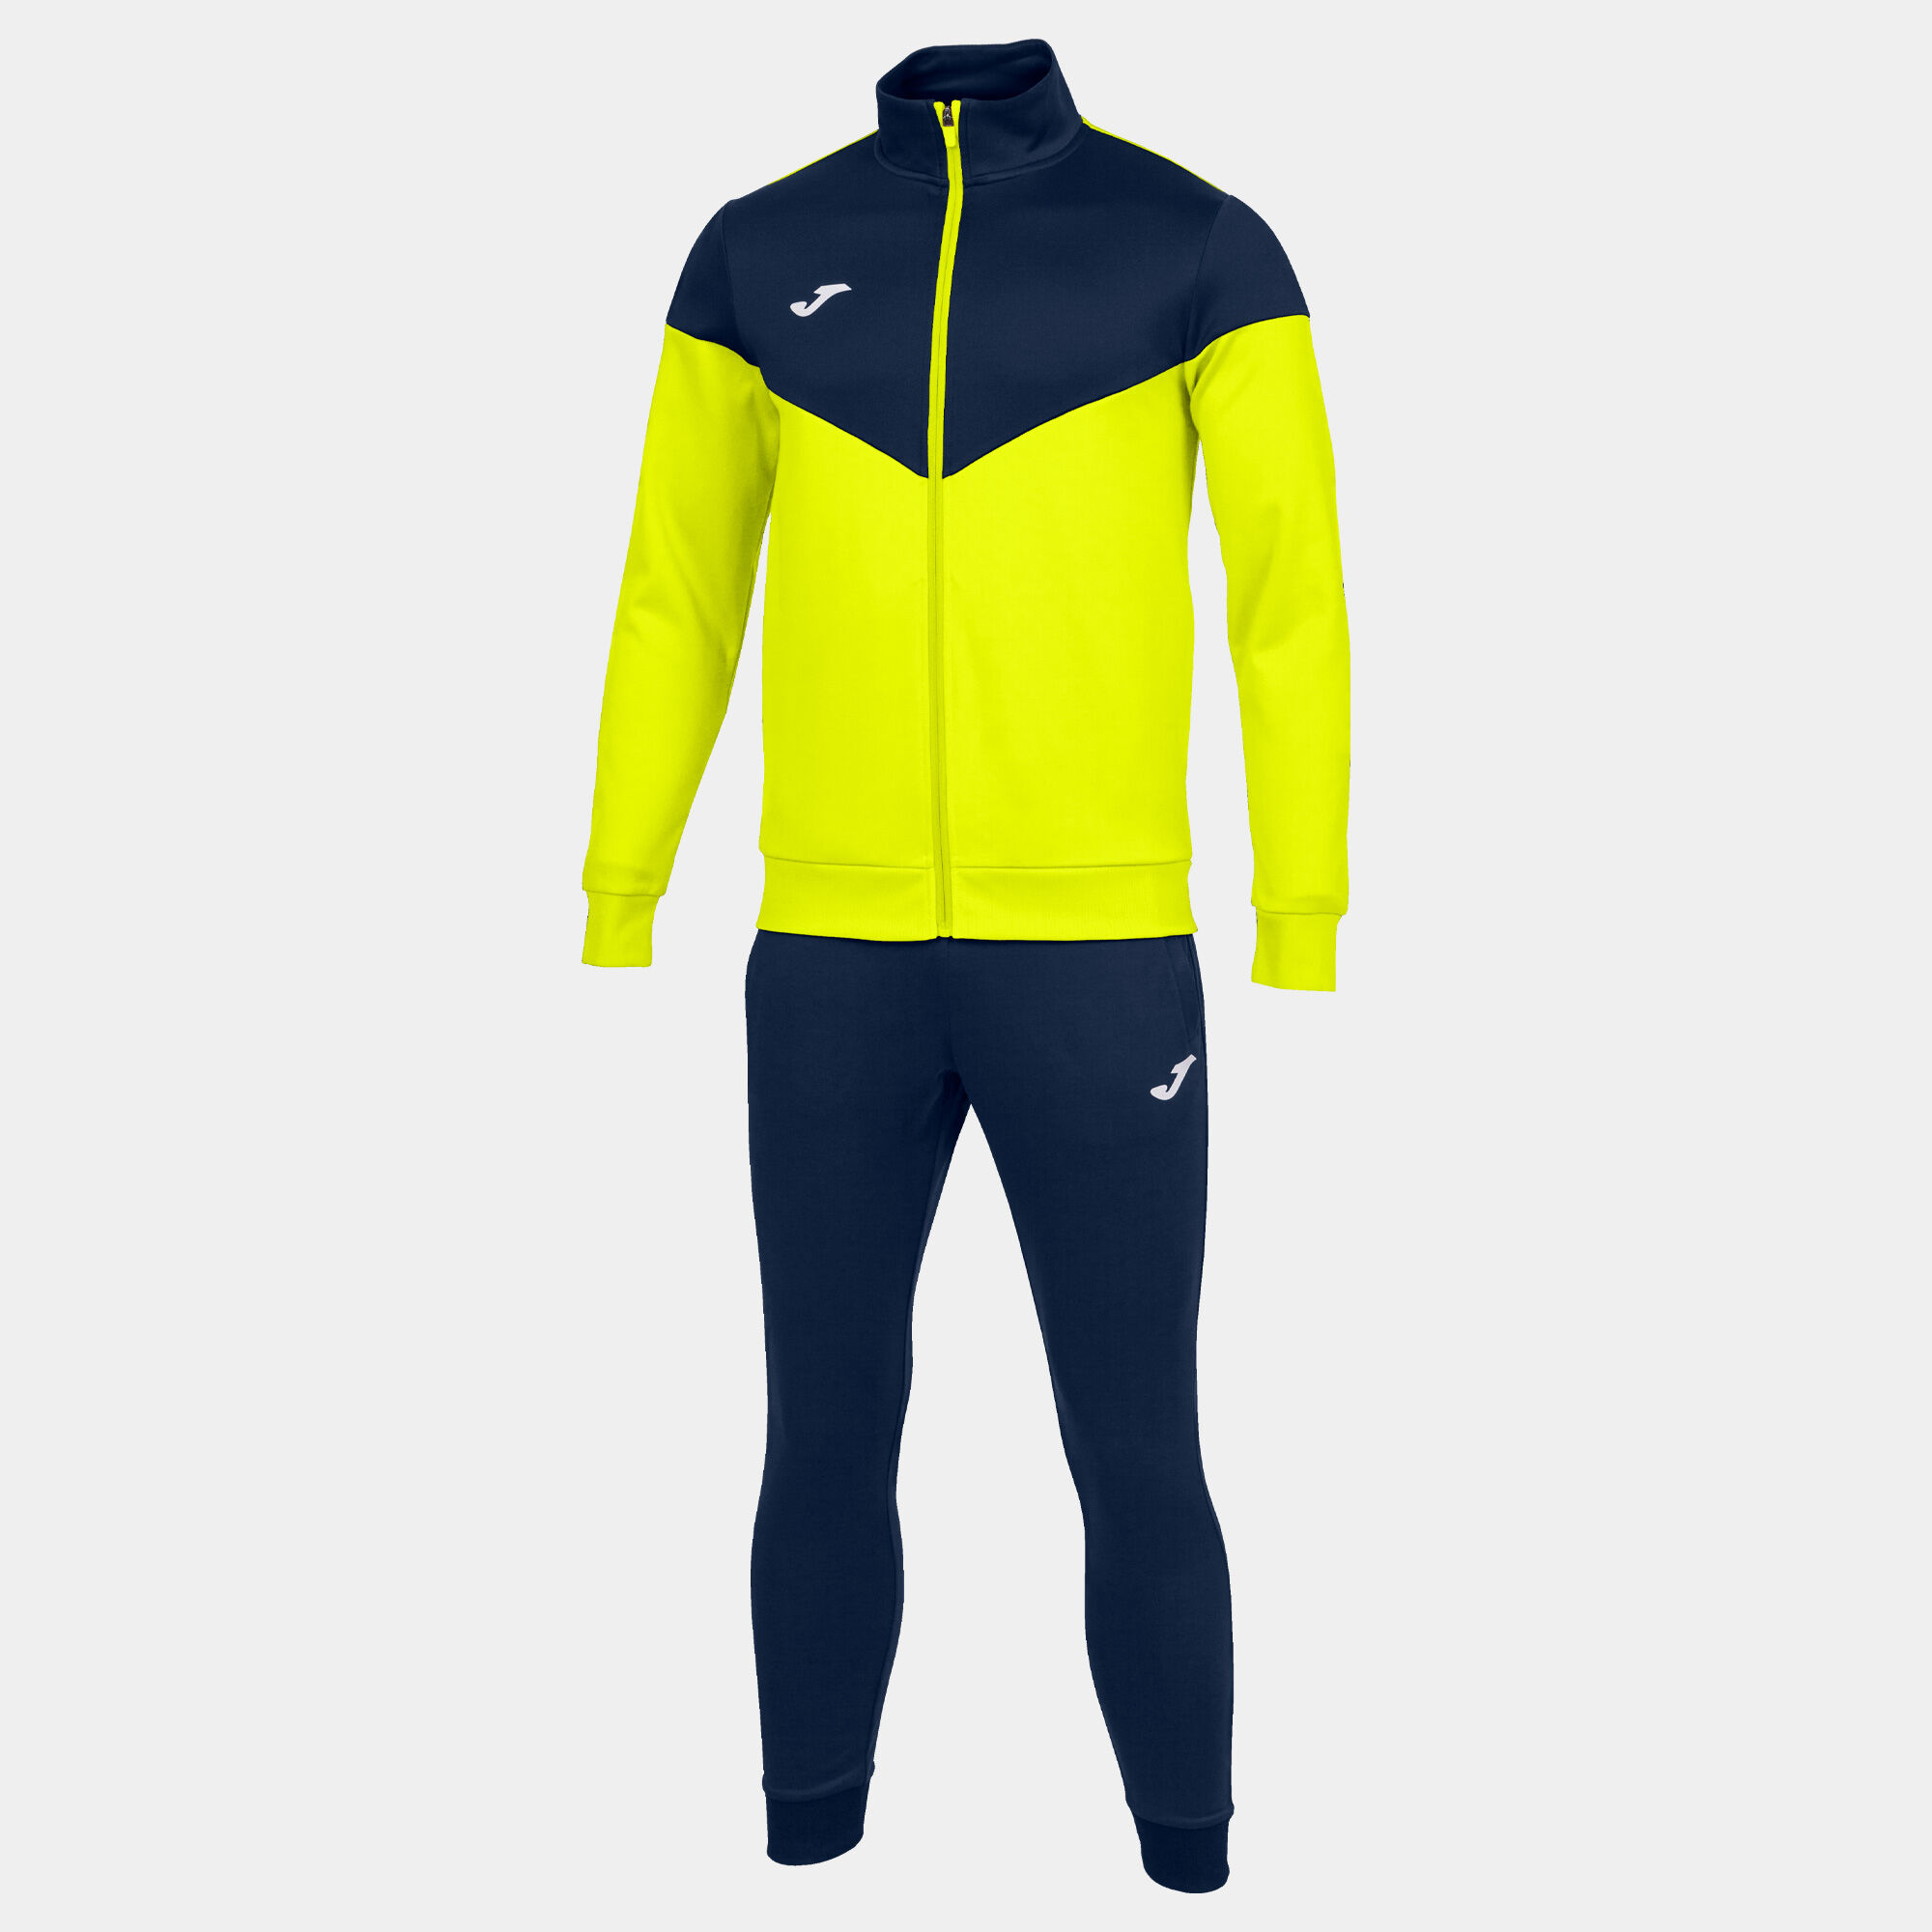 TRACKSUIT MAN OXFORD FLUORESCENT YELLOW NAVY BLUE